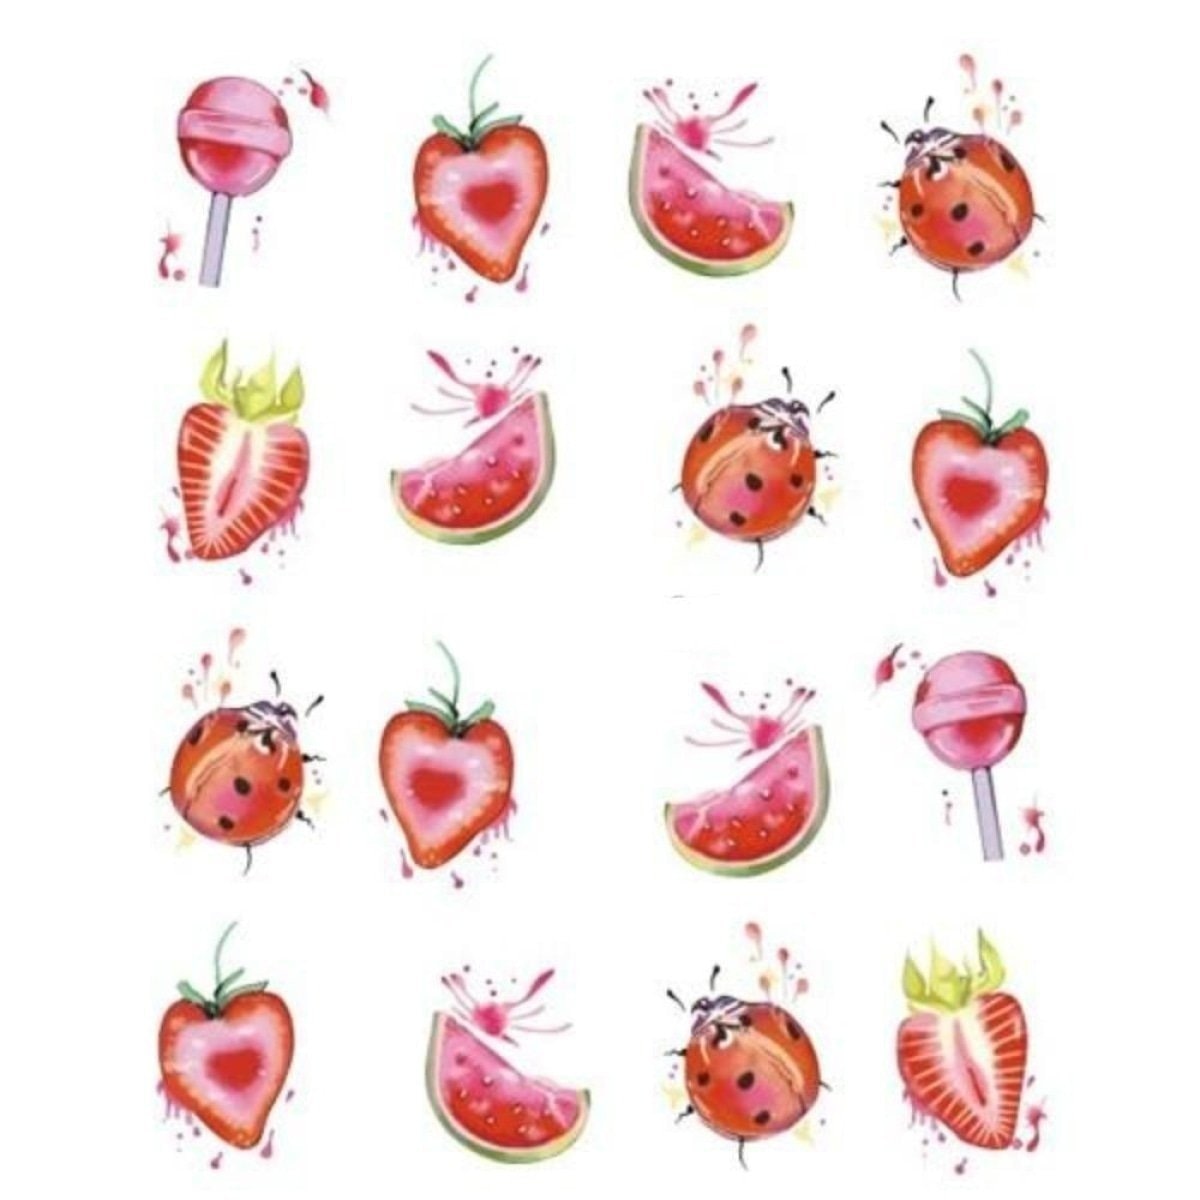 Strawberry Summer Cake & Fruit Stickers For Nails Nail Manicure Art - Stz-489 Sheet